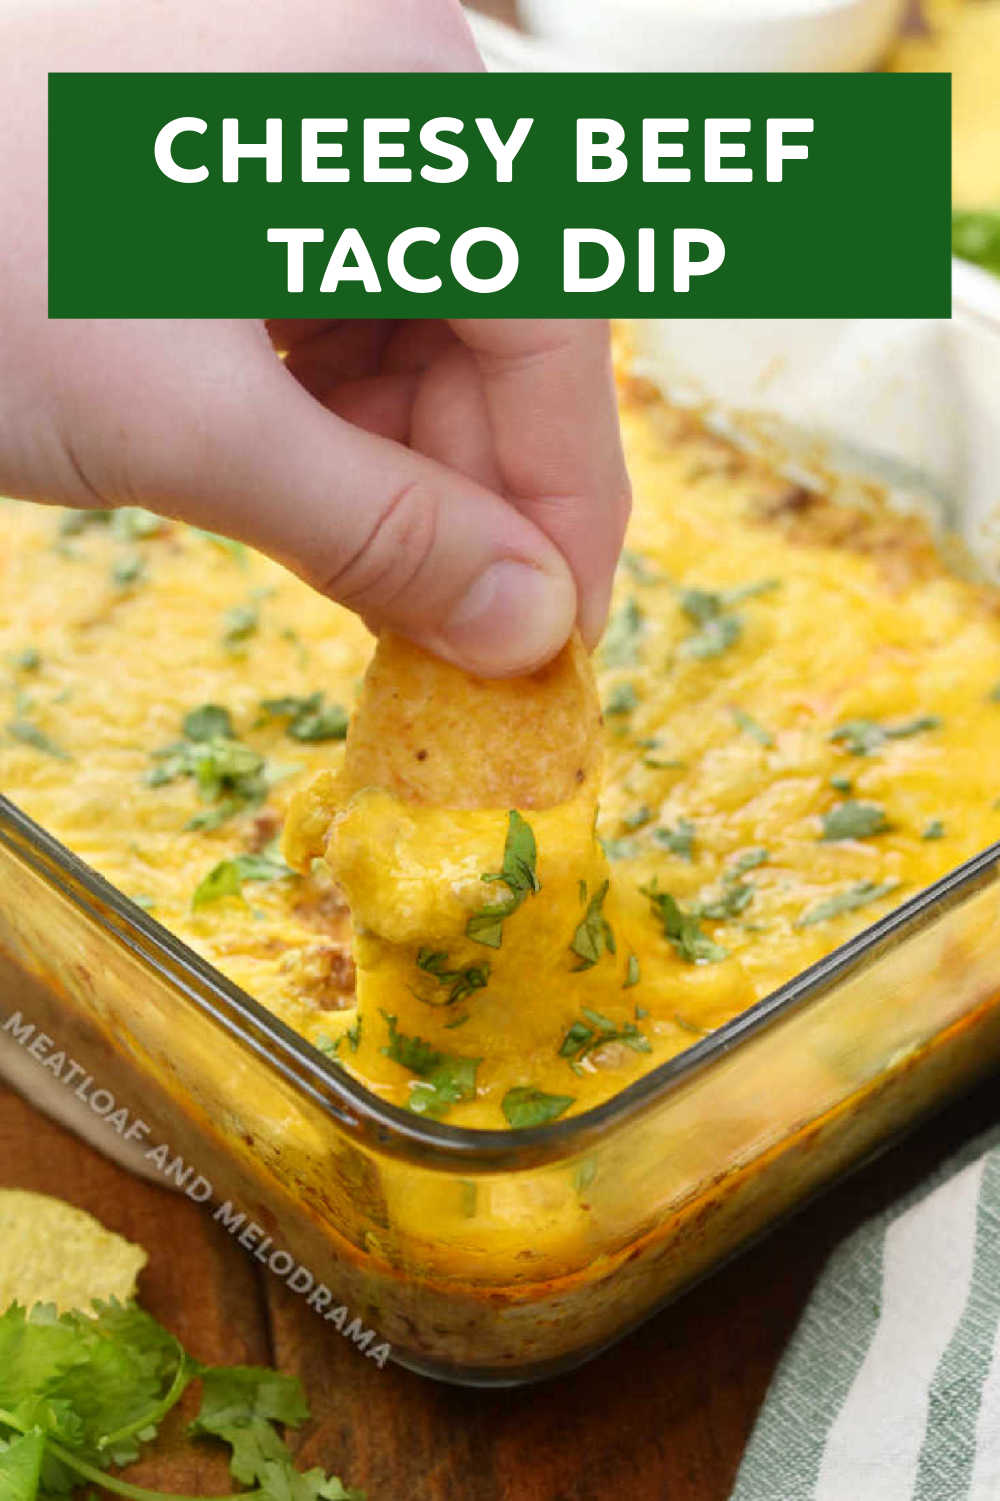 Cheesy Ground Beef Taco Dip is a taco dip recipe with ground beef or leftover taco meat, cream cheese, salsa and cheese. An easy appetizer perfect for game days, holidays or Taco Tuesday!  via @meamel